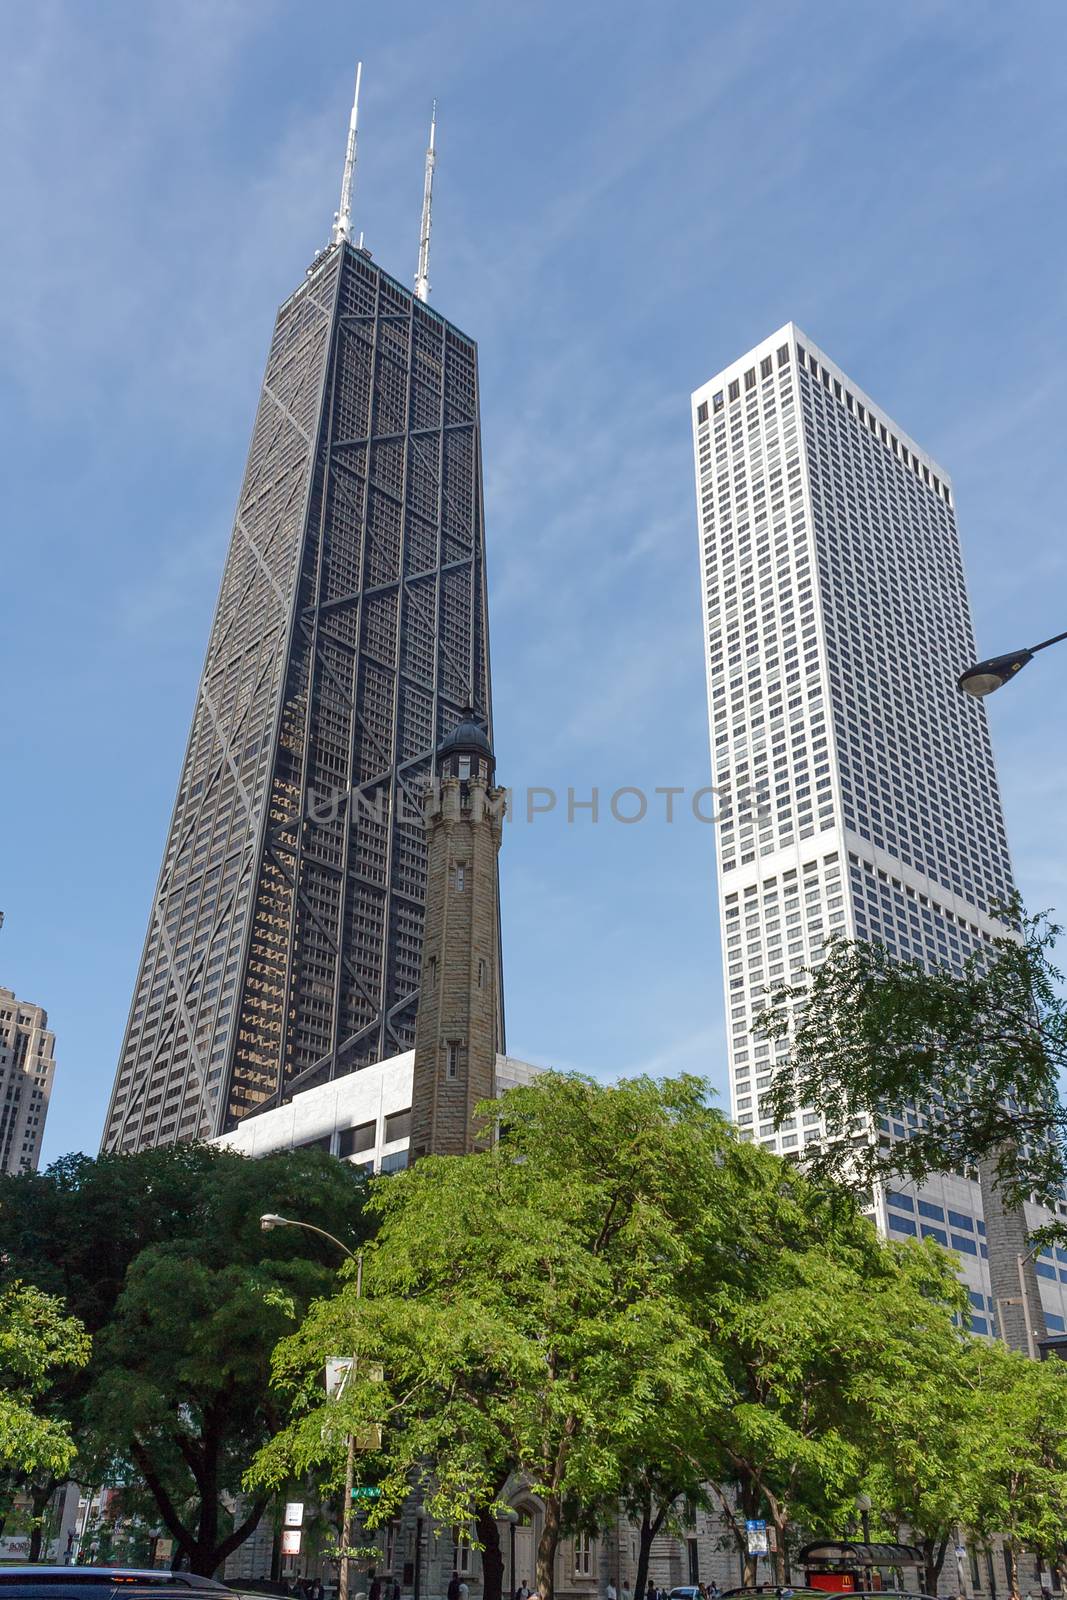 CHICAGO, USA - JUNE 4, 2010: Johnncock  Habuilding on Michigan Ave (Magnificent Mile) in Chicago was in 1968 the tallest building outside of New York. It stands next to Water Tower Place